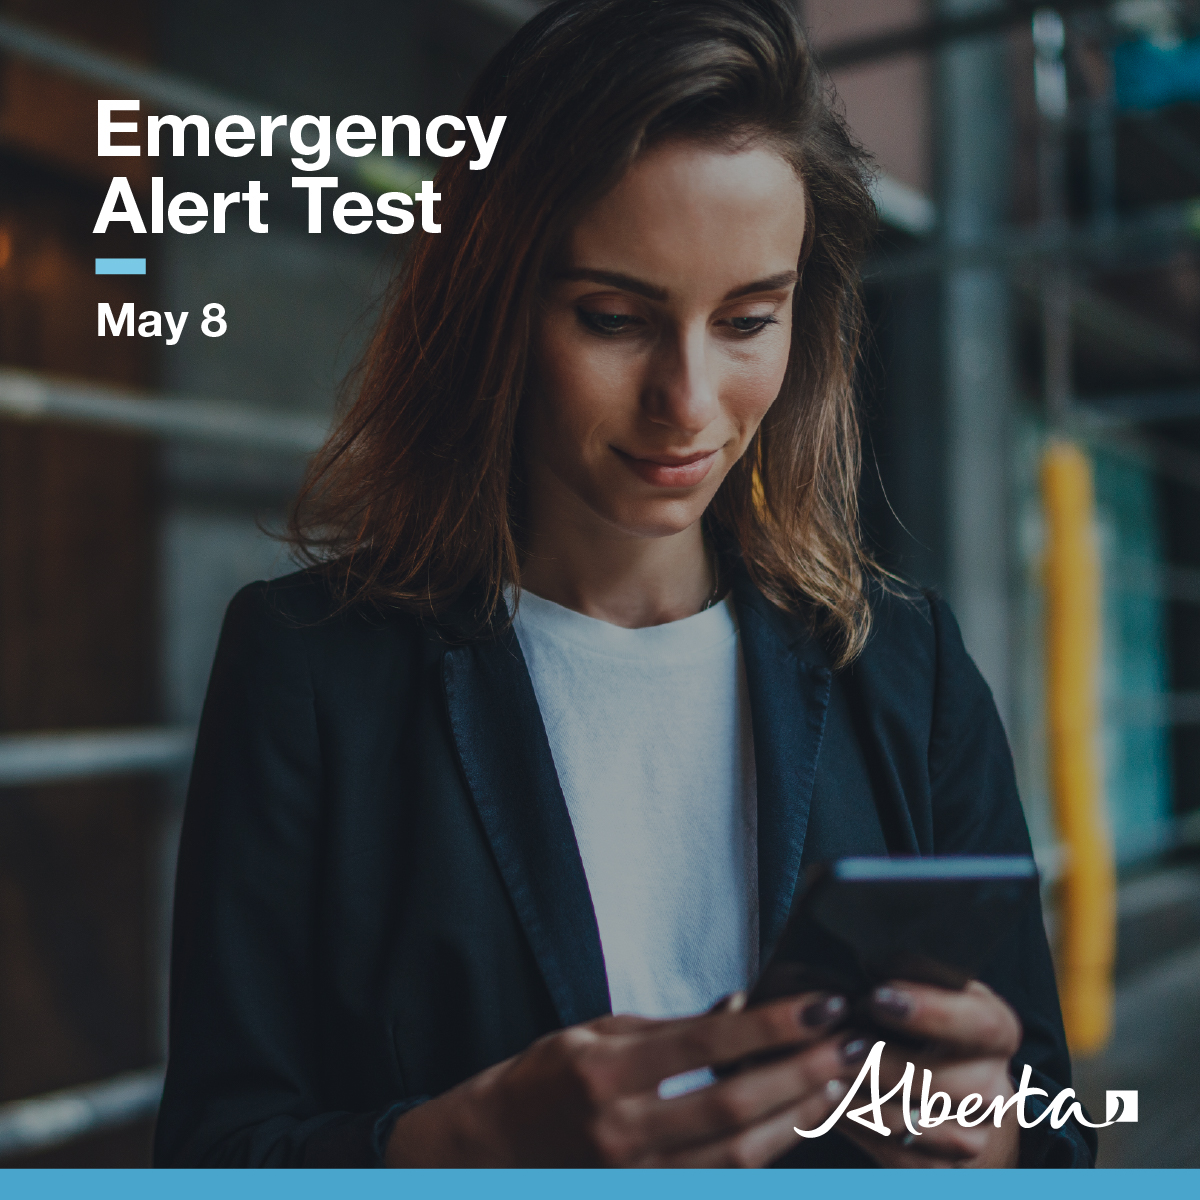 Reminder: a test of the emergency alerting system is happening today at 11:55am. Check your phone’s compatibility at alertready.ca Download the @AB_EmergAlert app to make sure you get all emergency notifications for your area: emergencyalert.alberta.ca/content/about/…